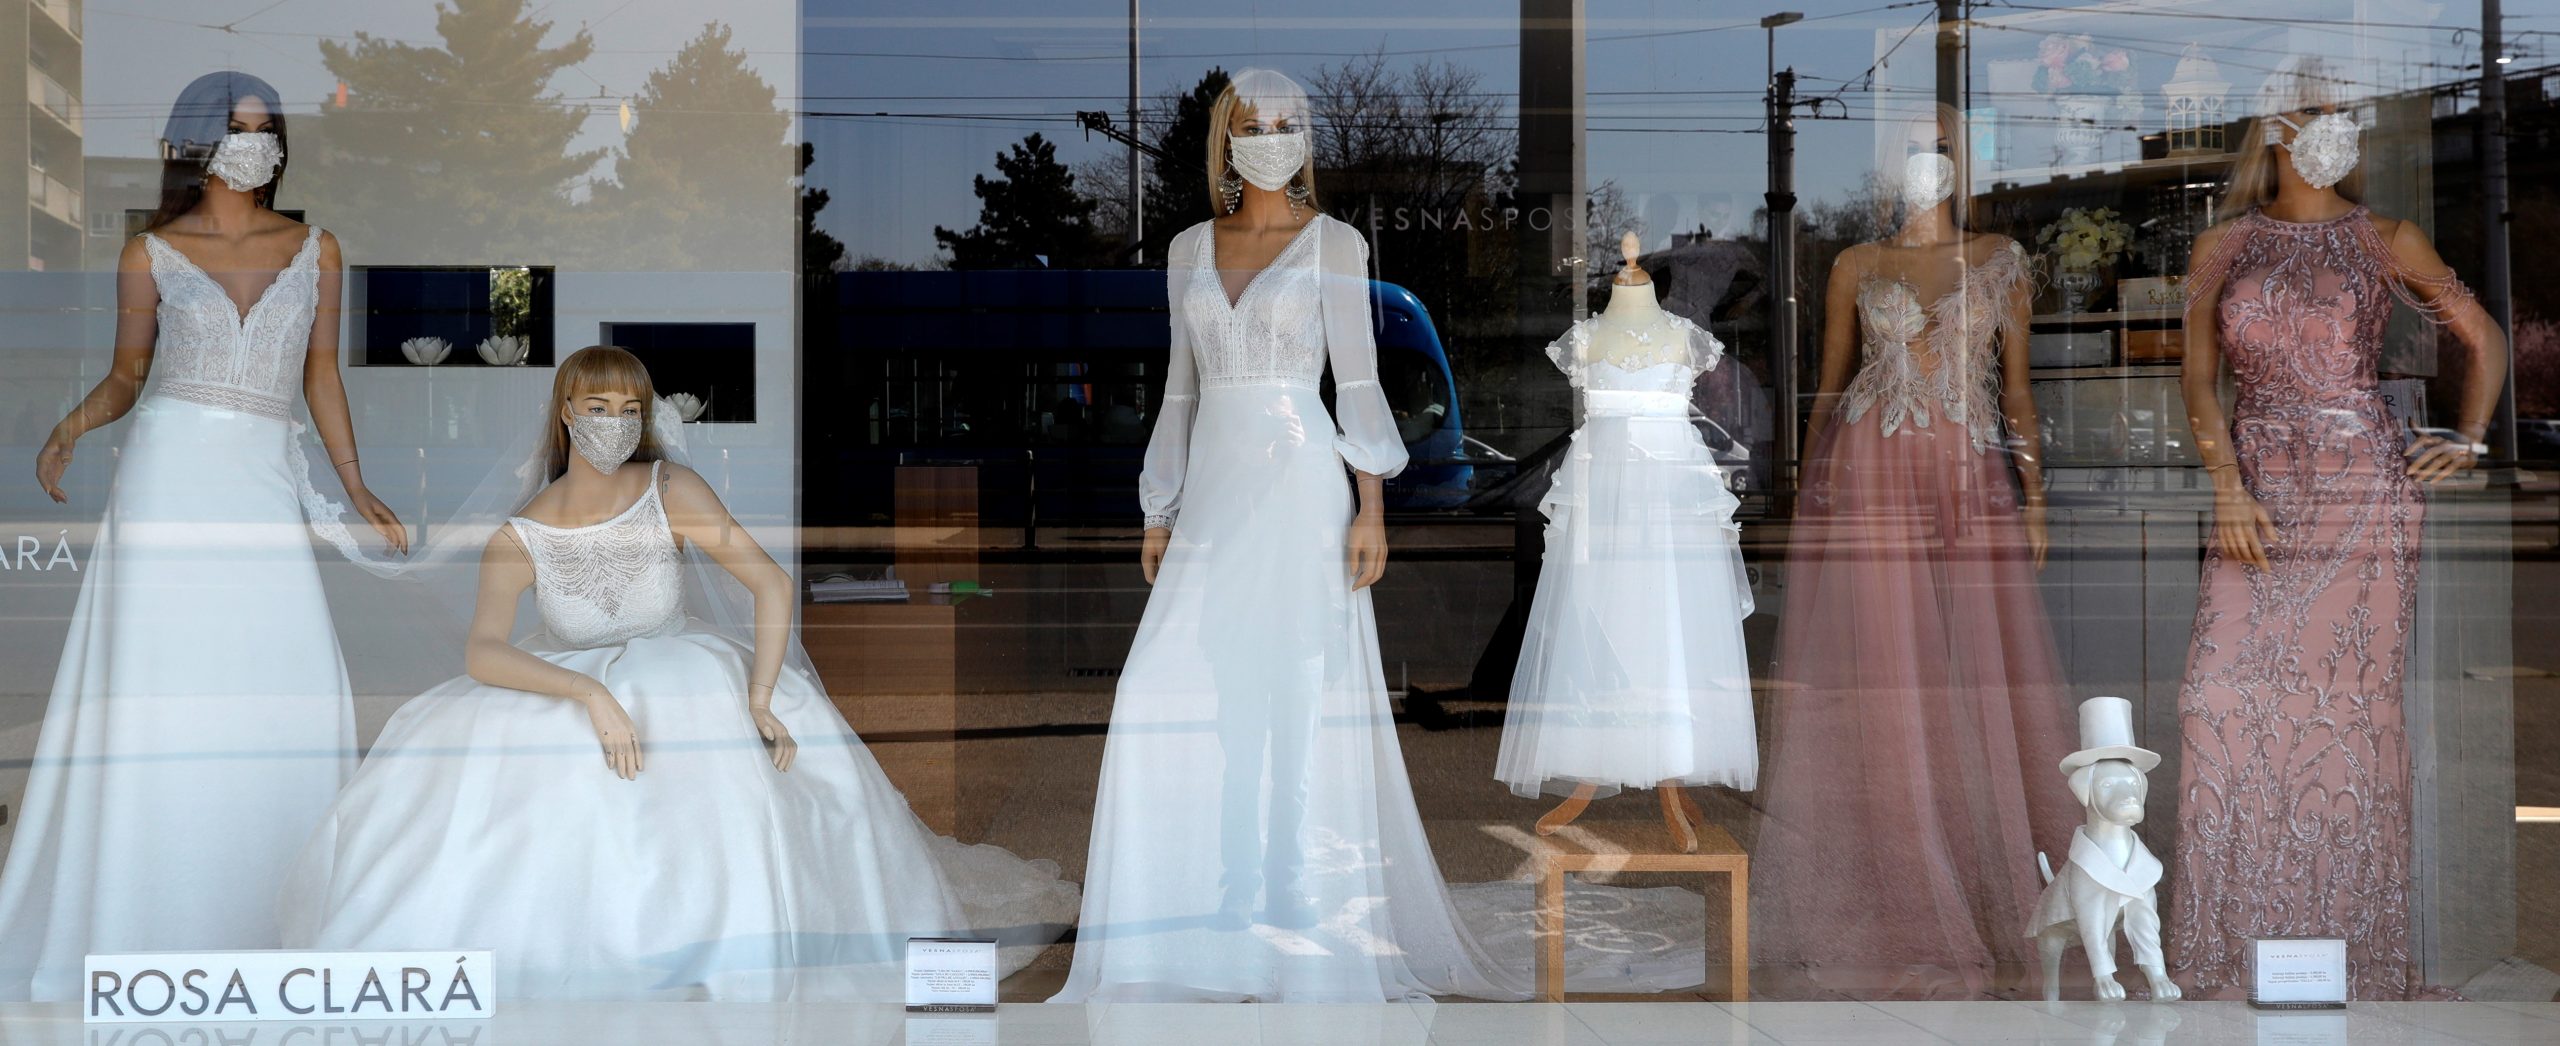 epa08297484 Mannequins dressed with face masks are displayed in the window of a wedding dress salon in Zagreb, Croatia, 16 March 2020. According to reports on 16 March 2020, Croatia has 49 confirmed cases of COVID-19 caused by coronavirus.  EPA/ANTONIO BAT